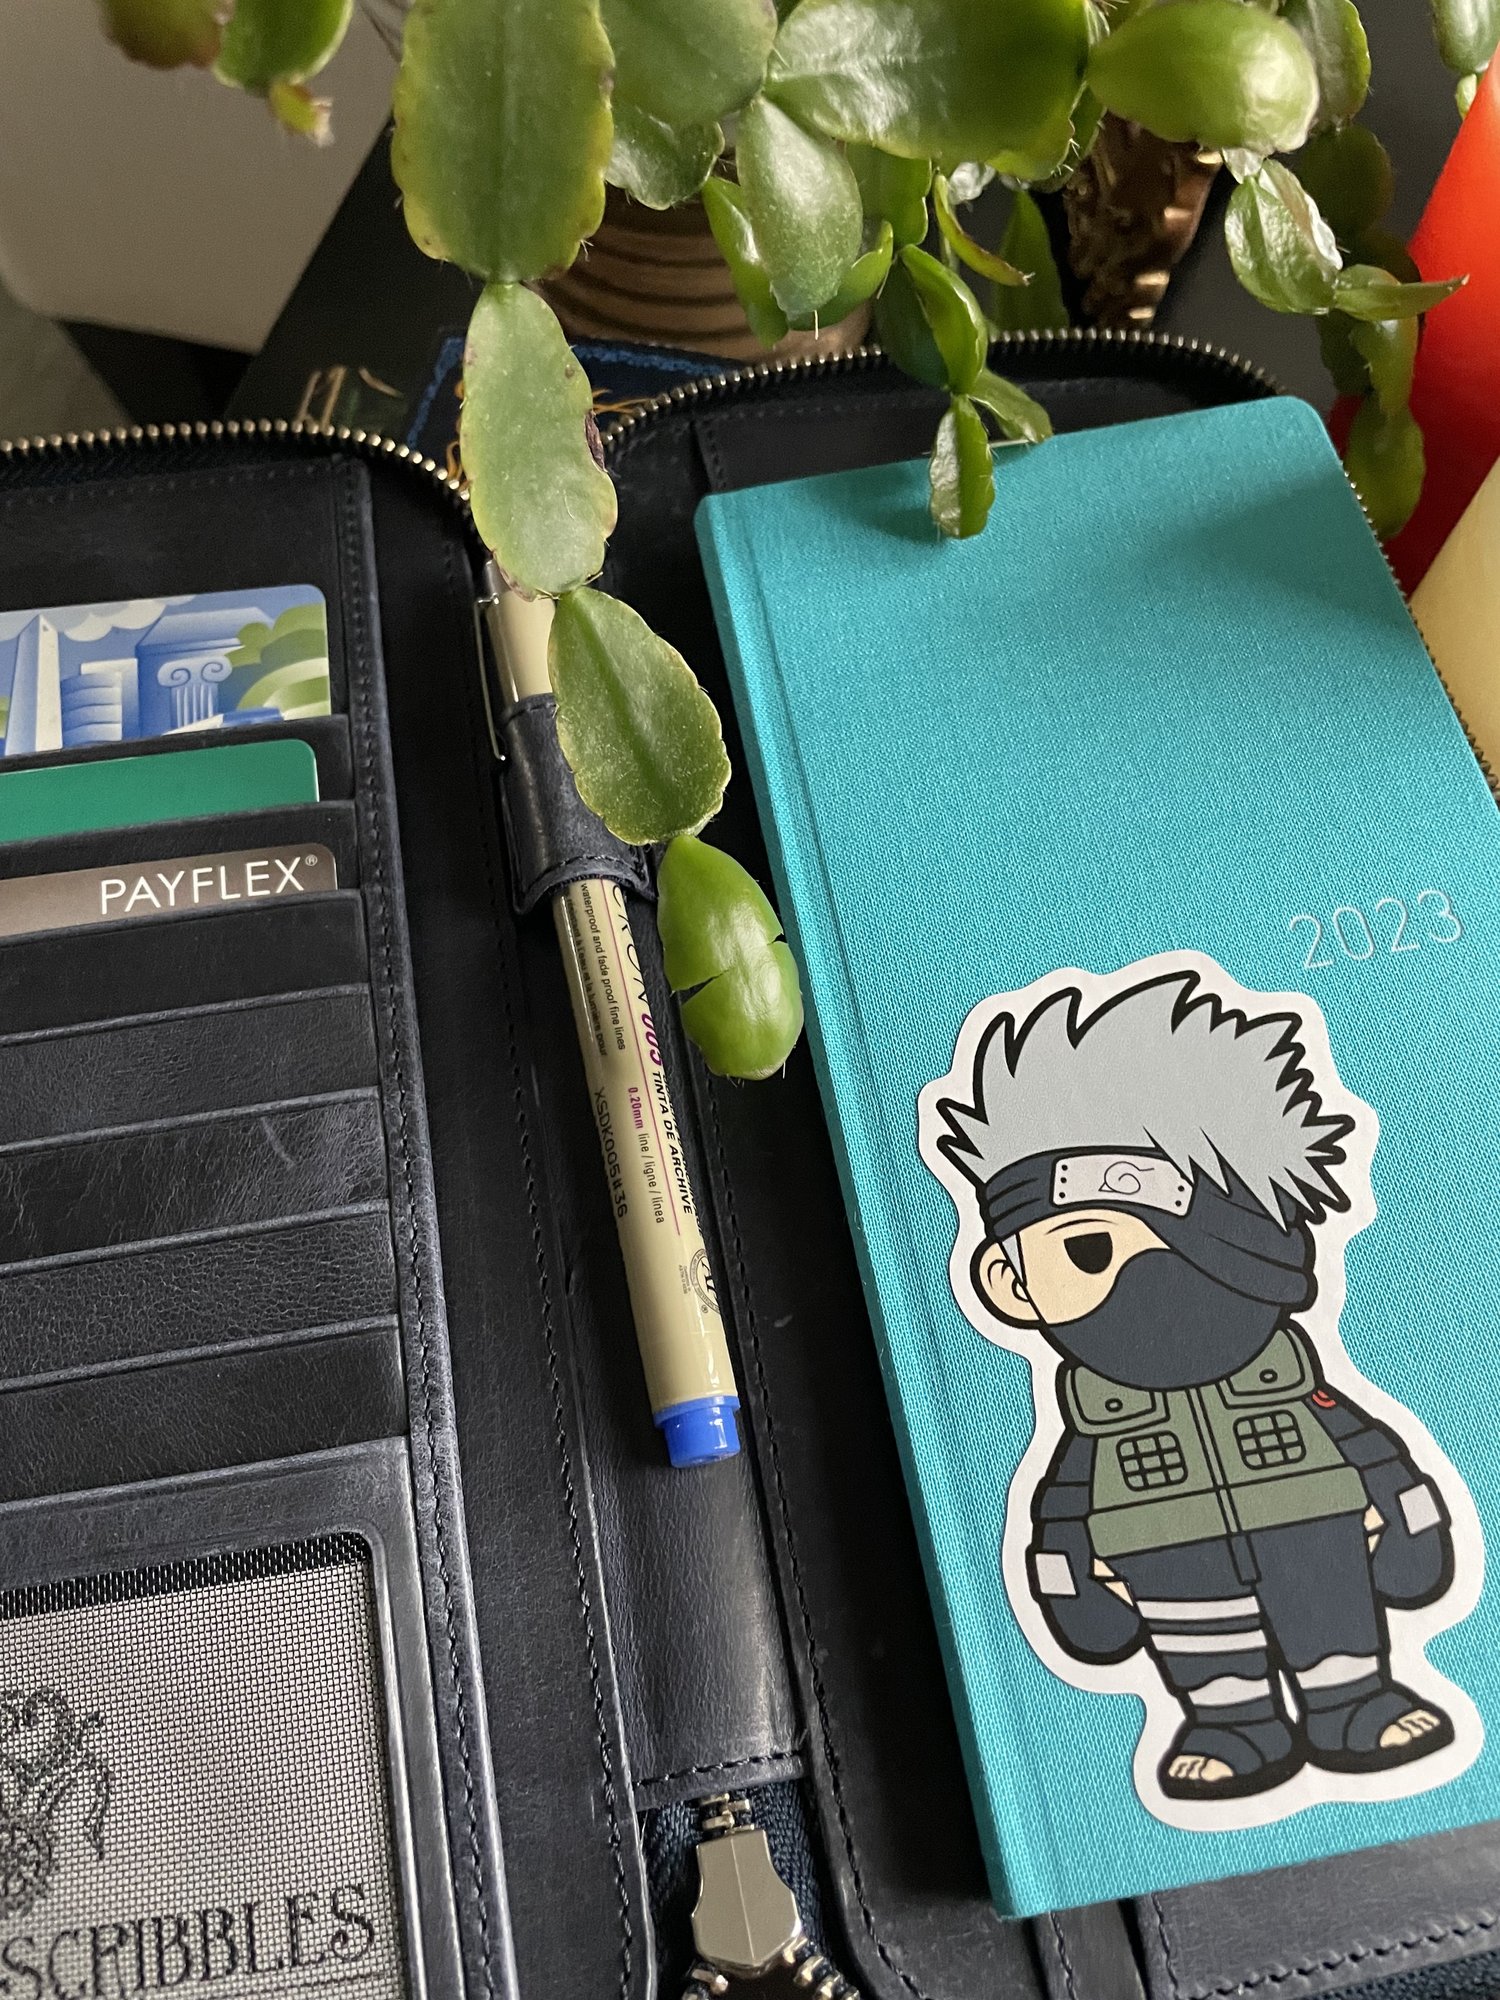 Product Review: Galen Leather Zippered Hobonichi Weeks Cover